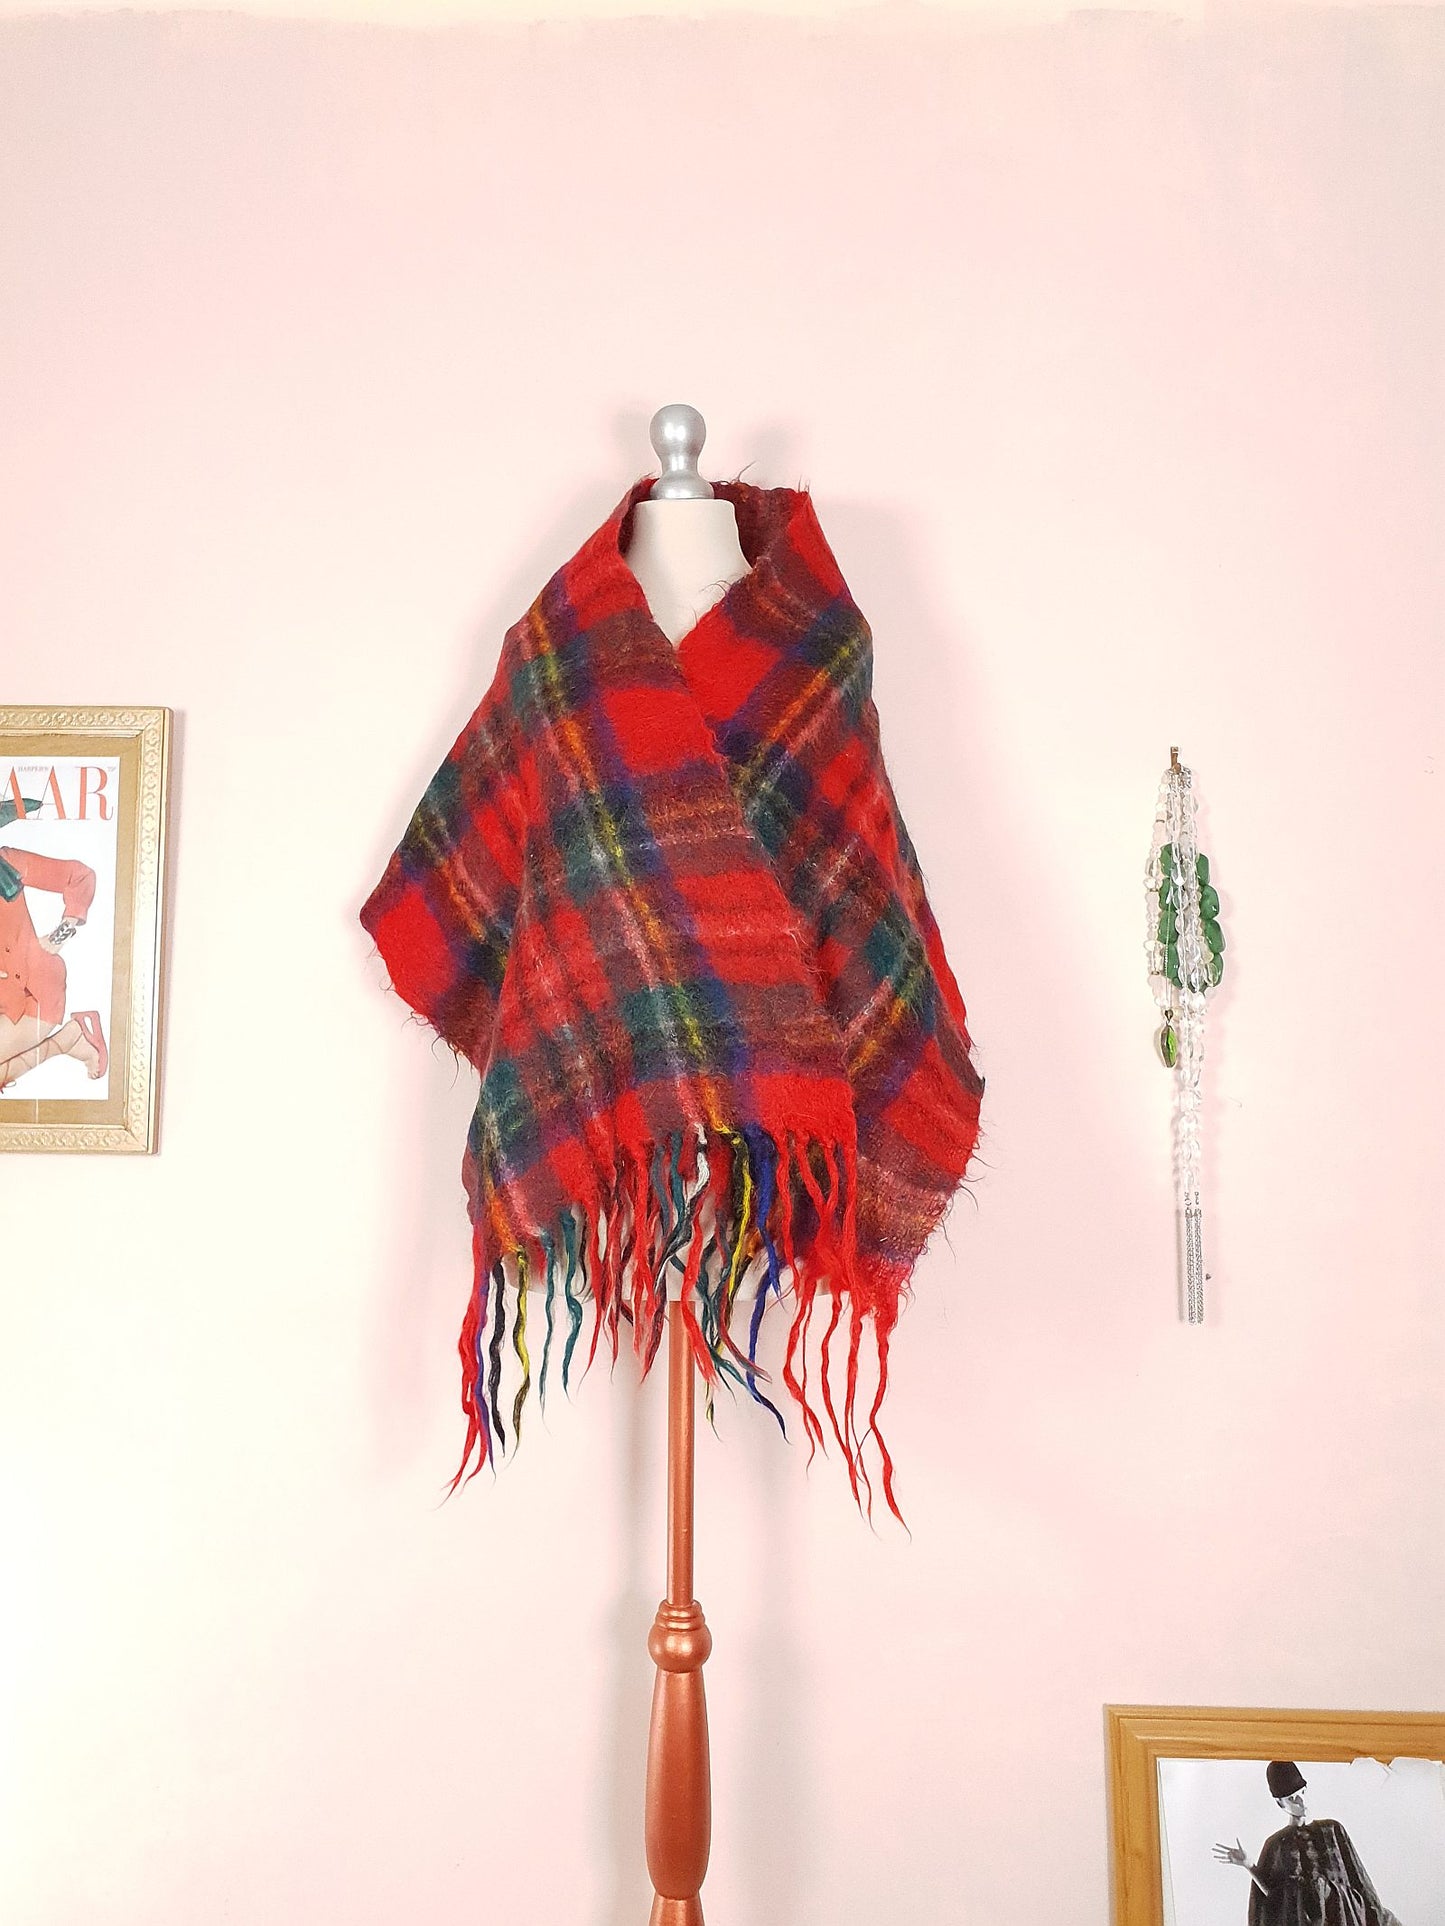 Vintage 1970s Tartan Red Scarf Mohair and Wool St. Michael Plaid Check